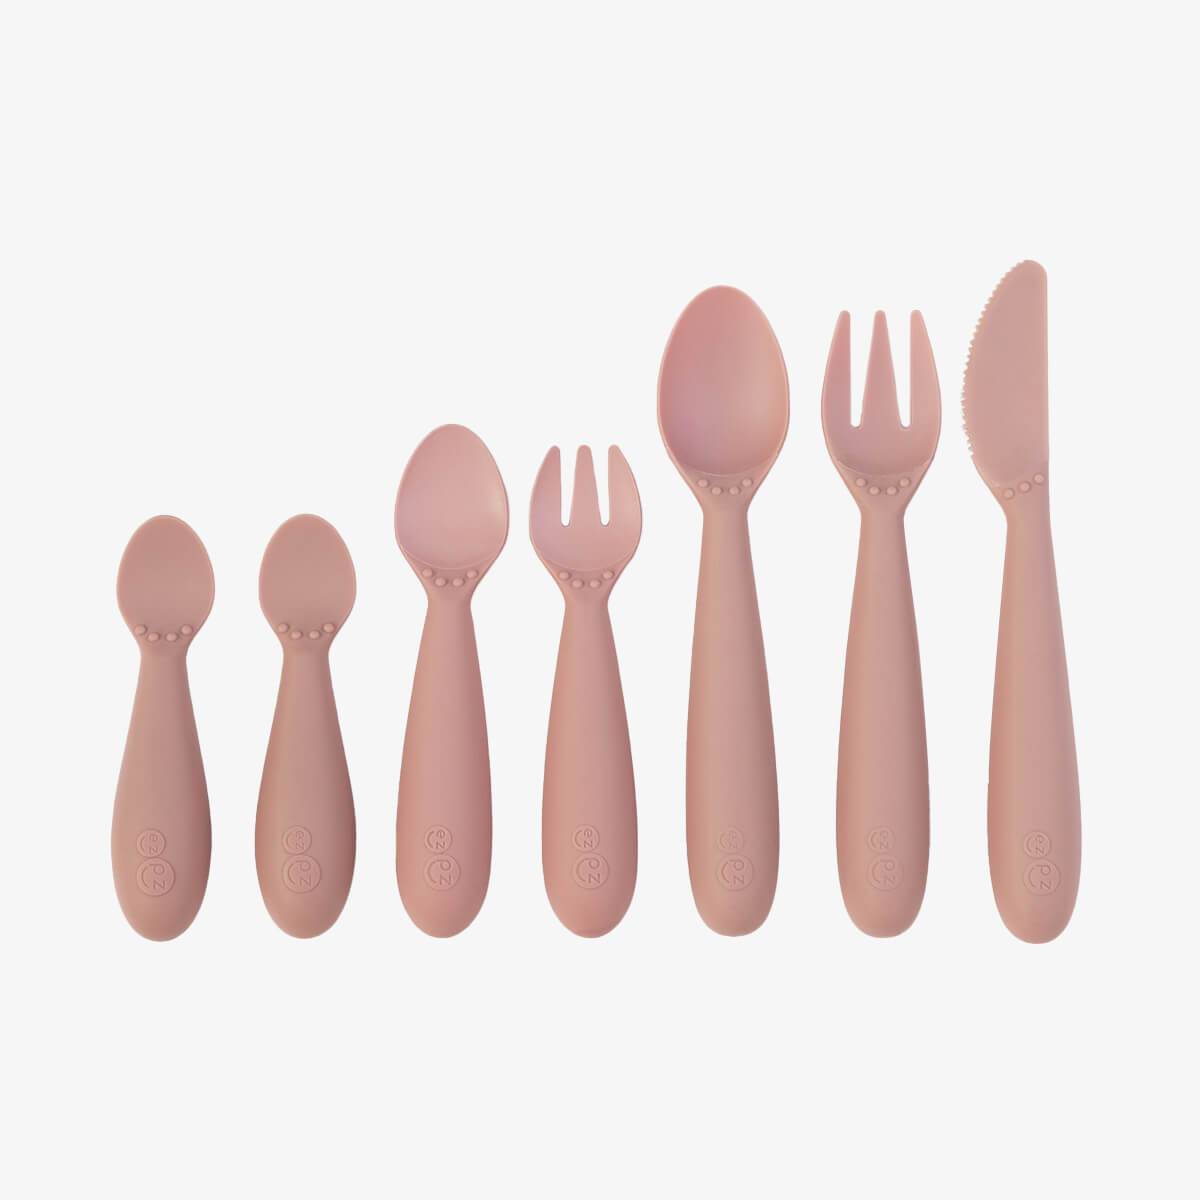 5 Set Toddler Utensils,Toddler Spoons and Forks-BPA & Phthalate Free Utensil Sets,Kids Silverware with Silicone Handle,Baby LED Weaning Supplies for